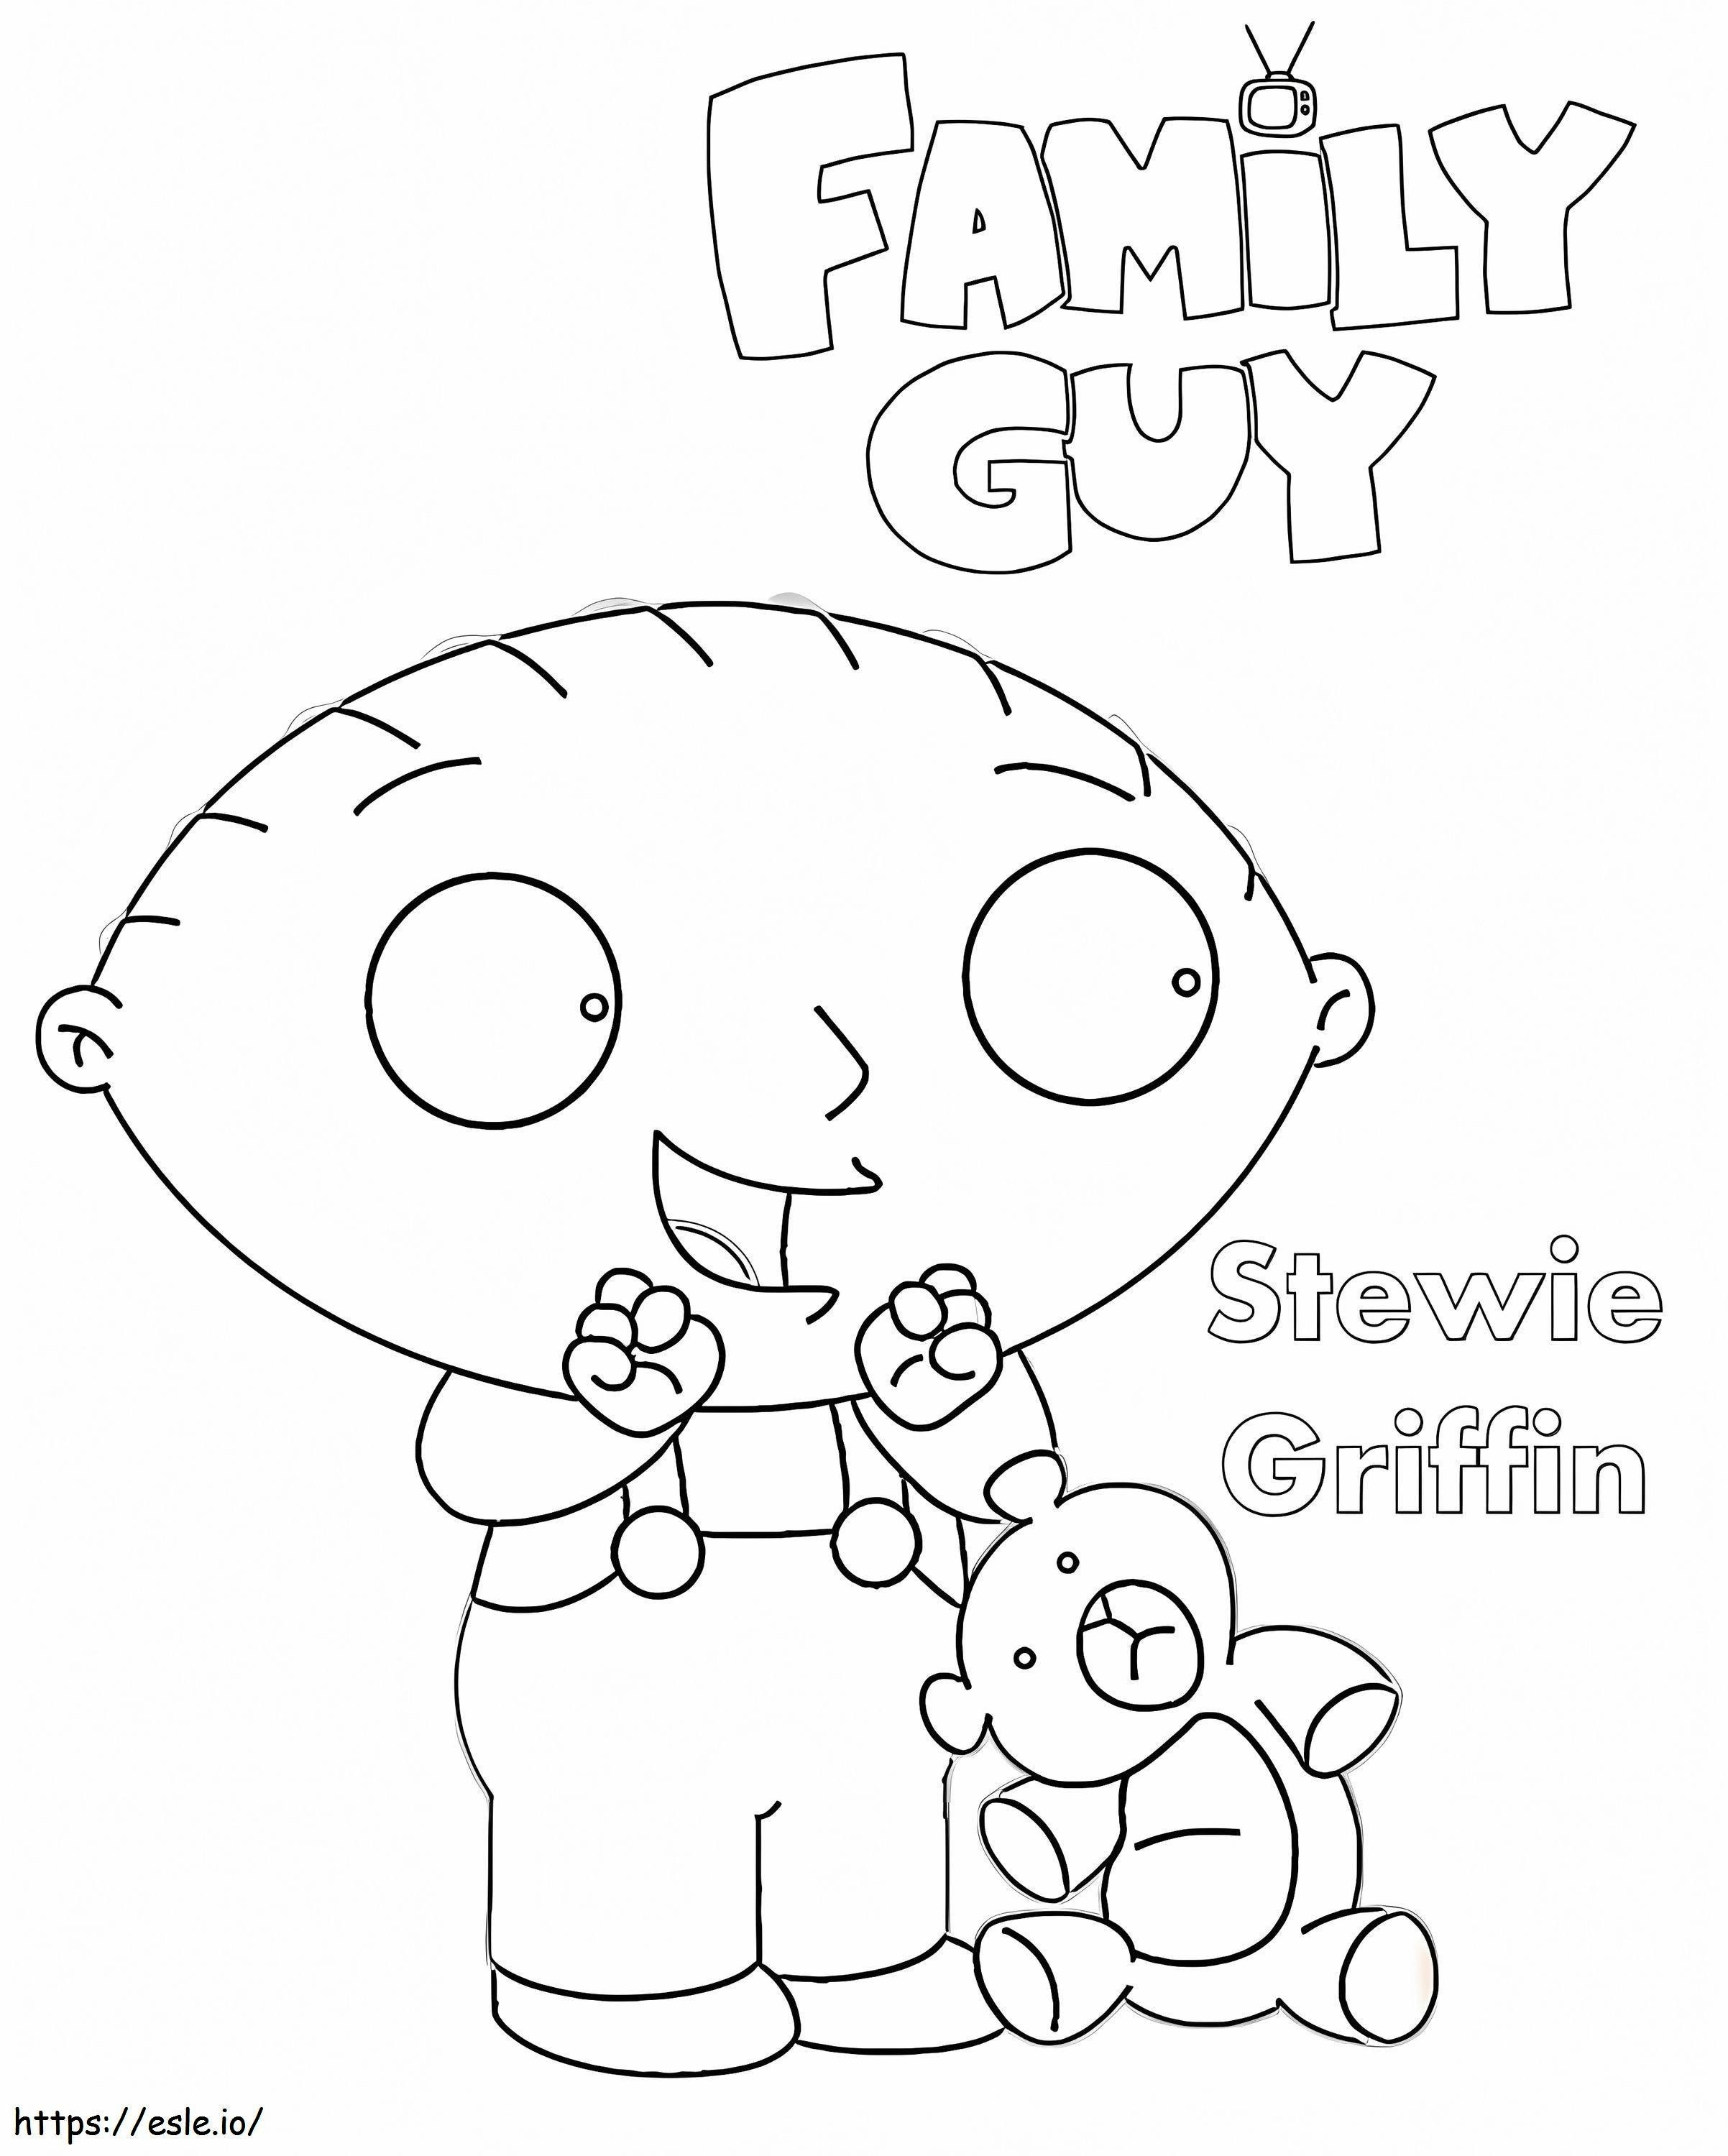 Stewie Griffin Family Guy coloring page